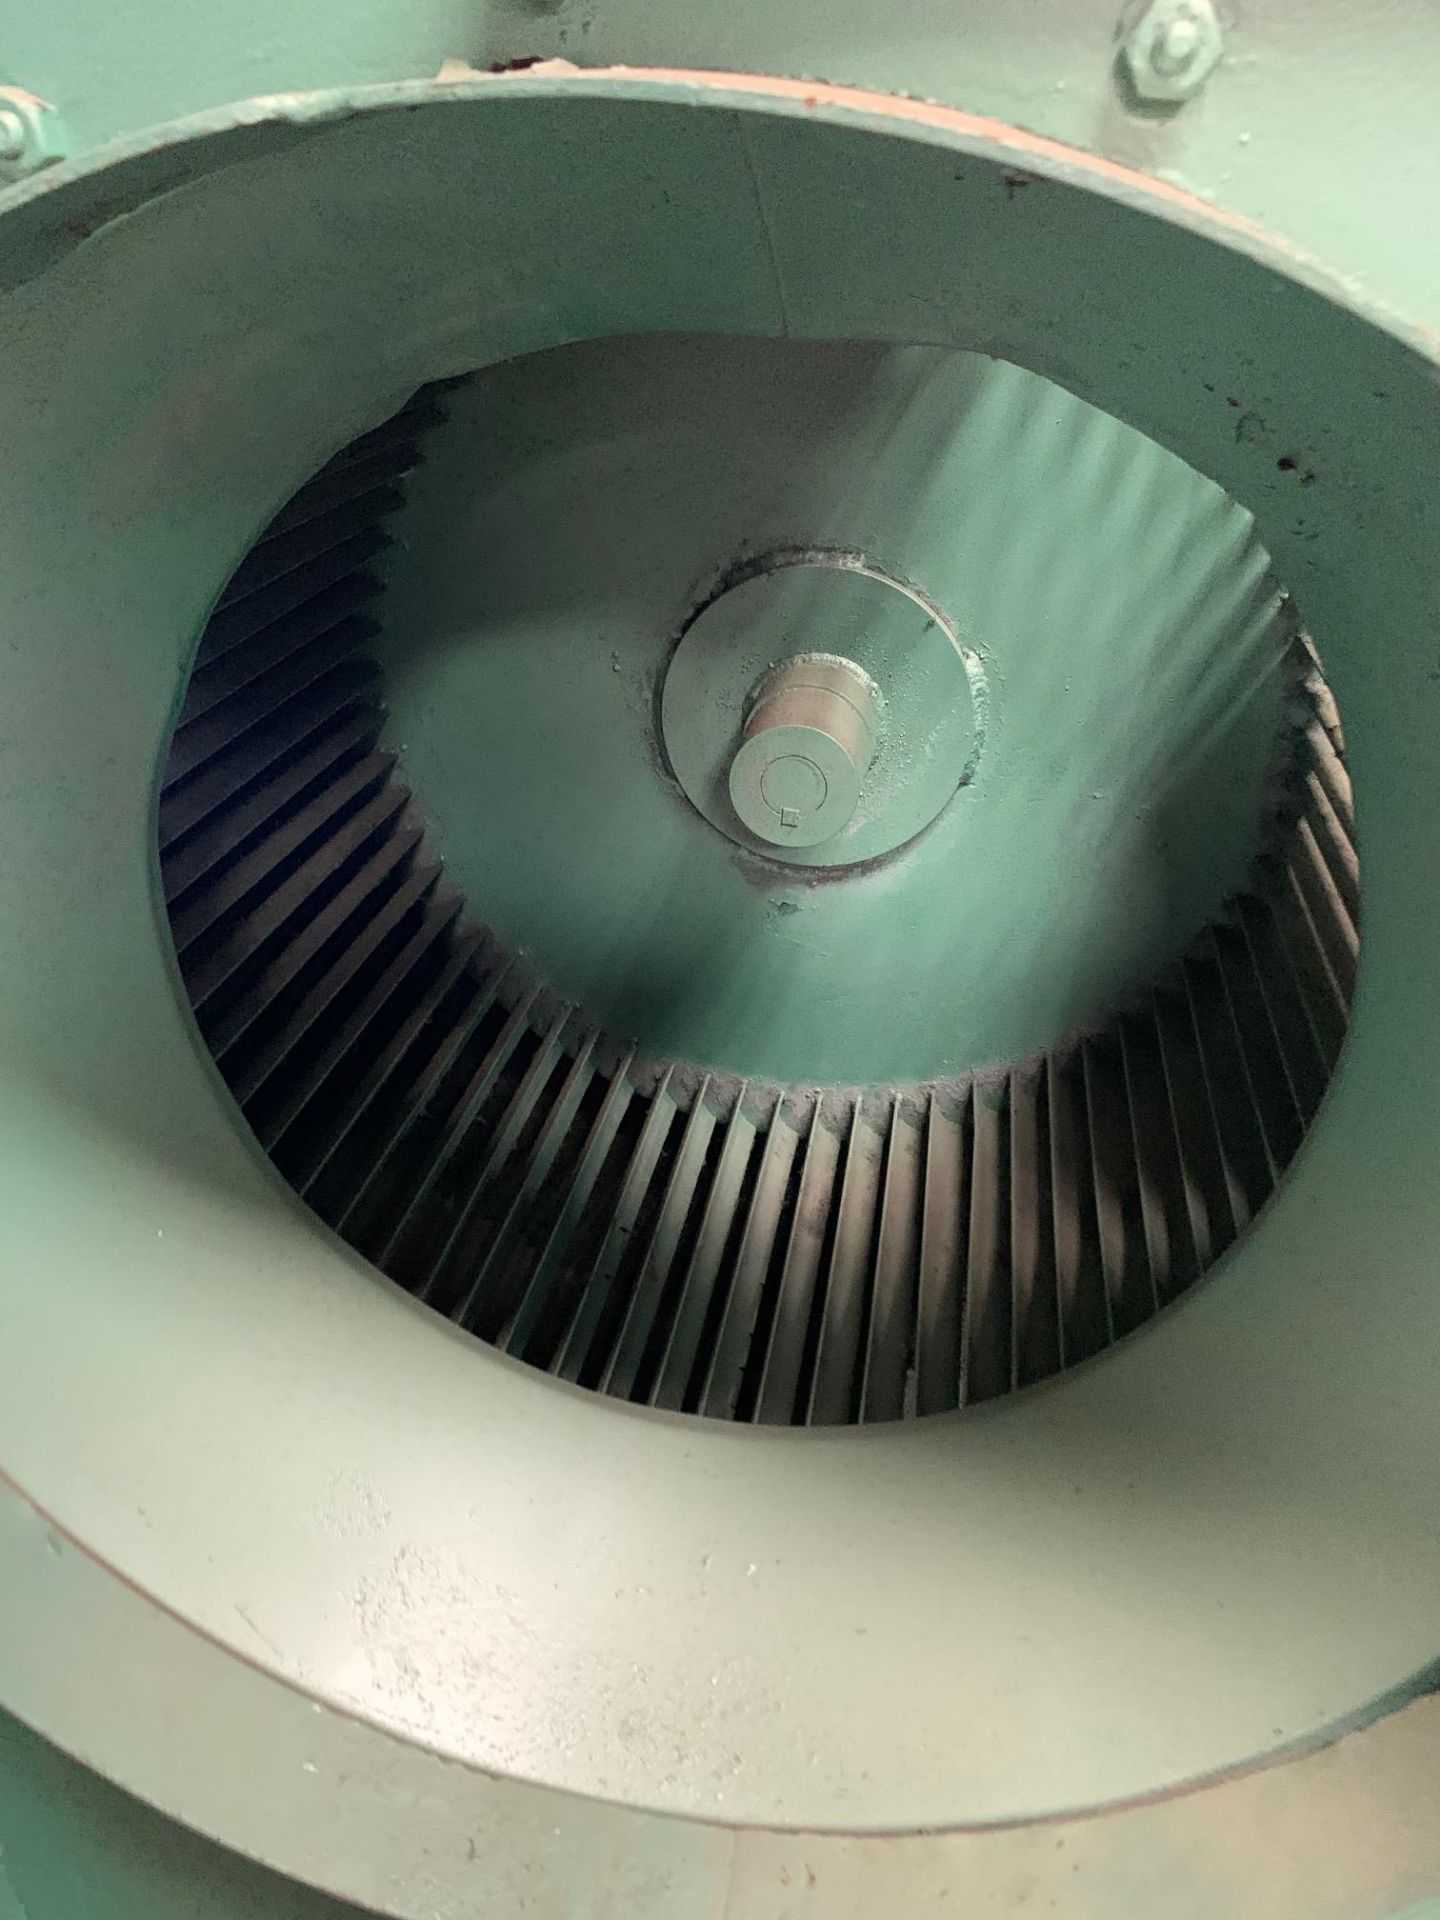 Suction Fans 5HP 220/460 volts 1750 Rpm, Rigging Fee: $25 - Image 7 of 10